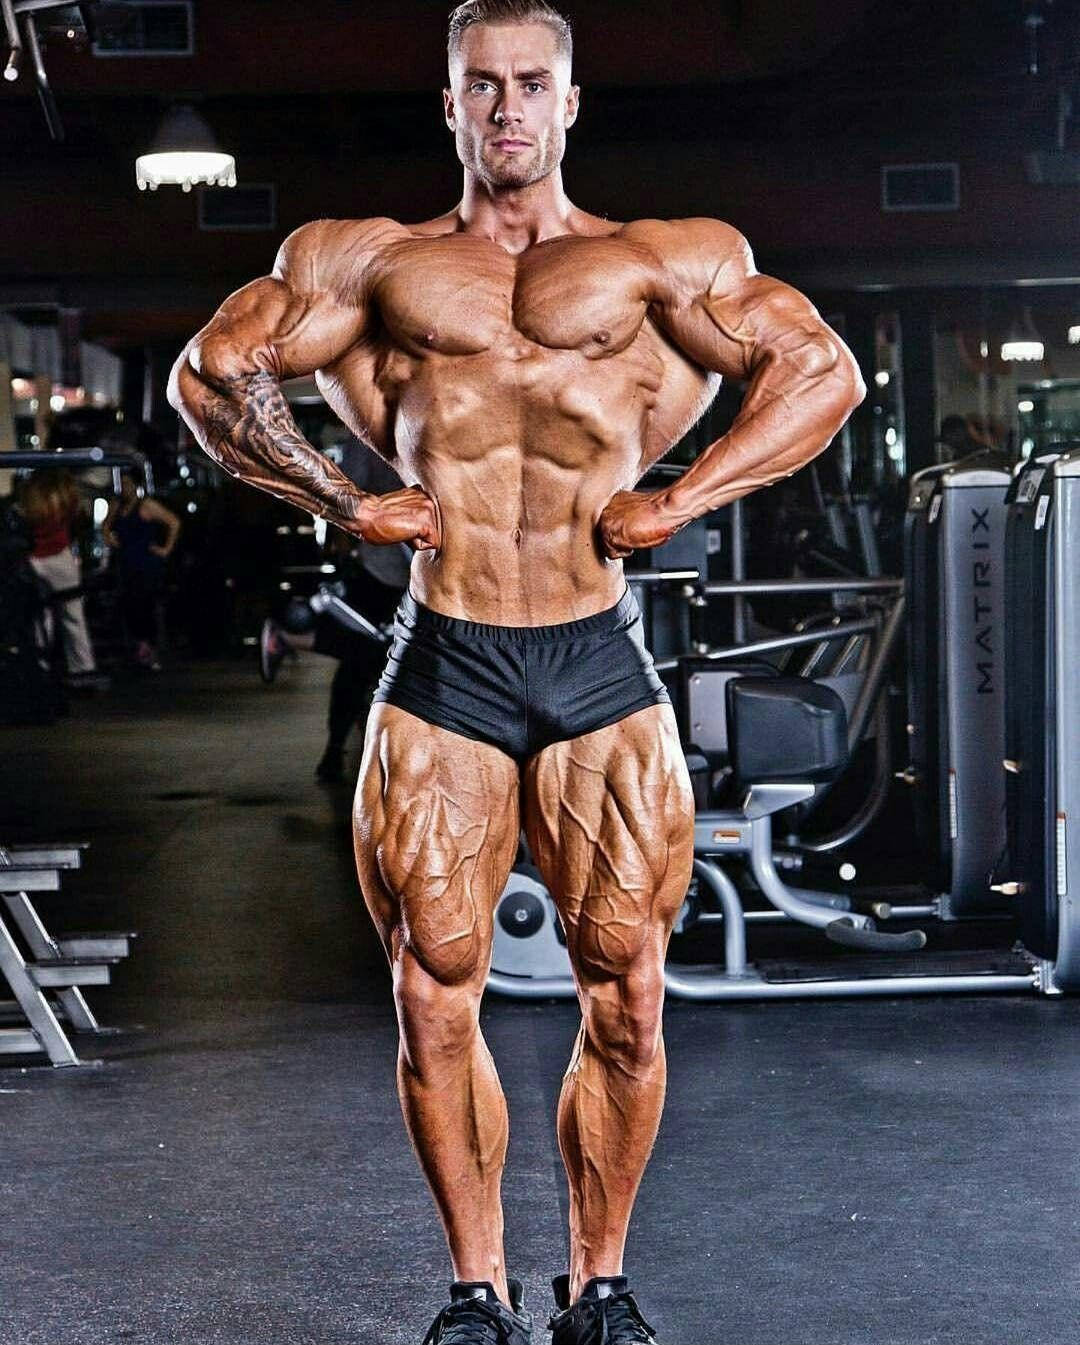 Meet the Tampa man bound for Olympia, the Super Bowl of bodybuilding